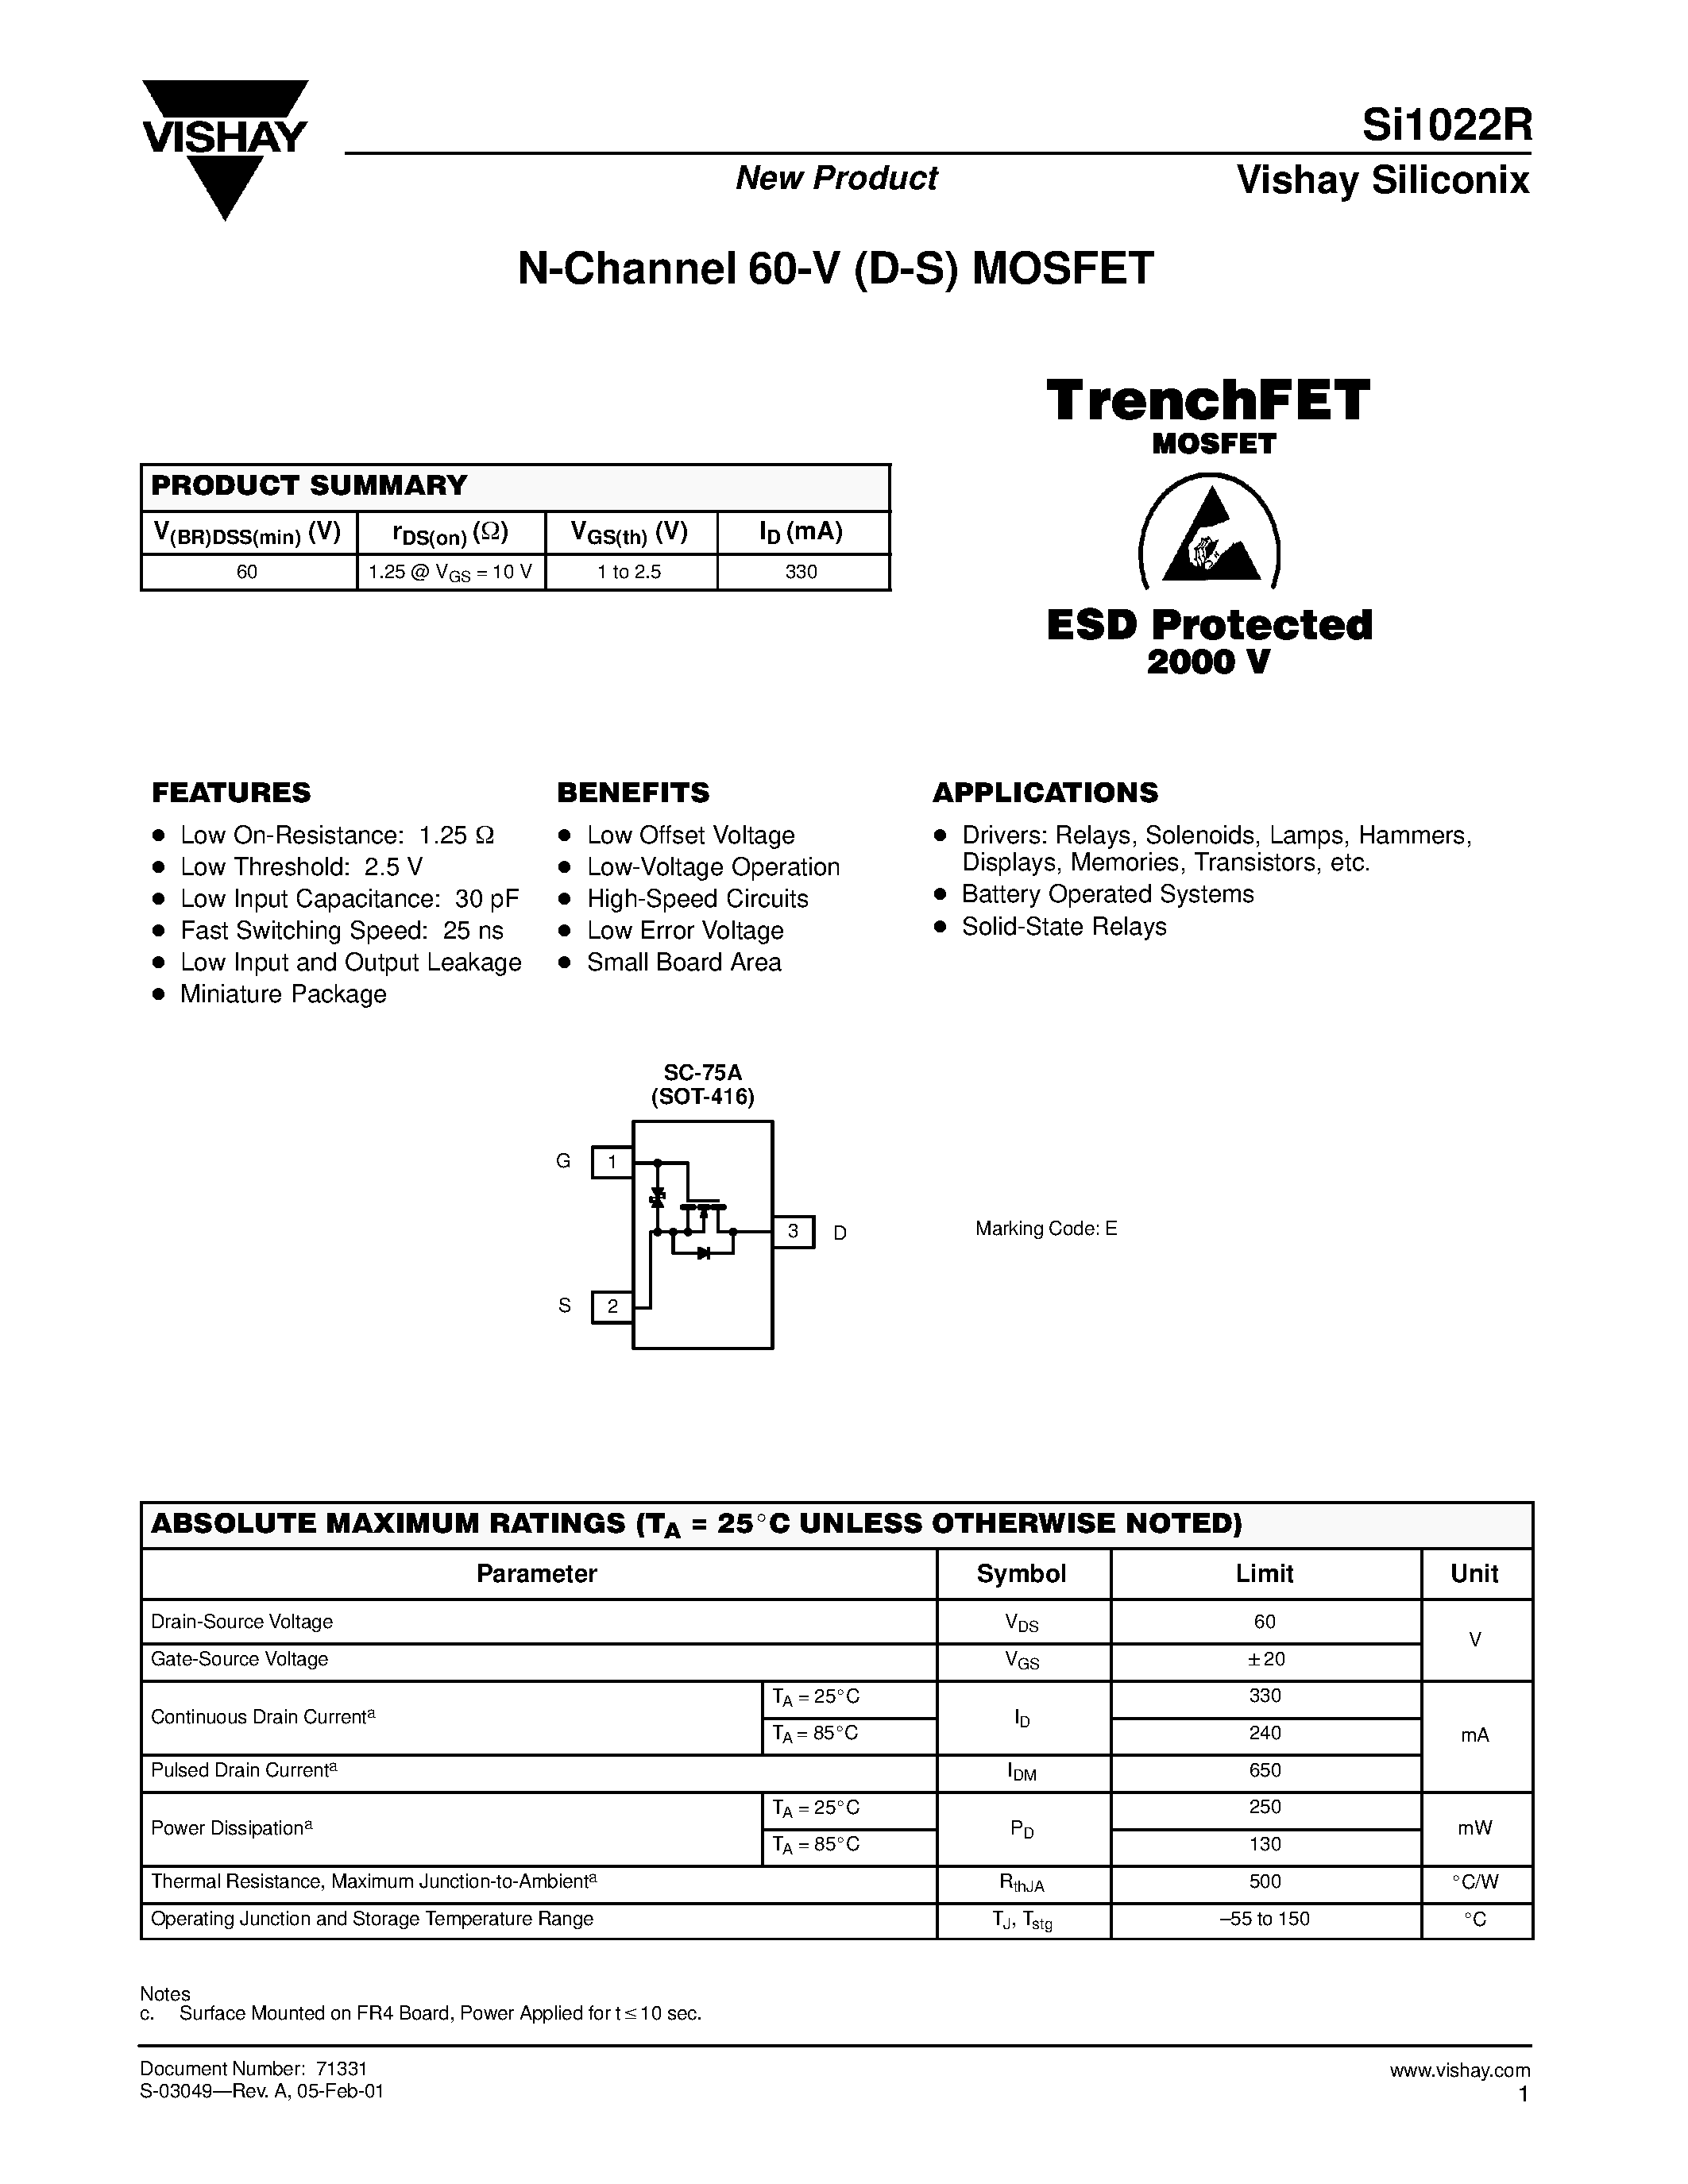 Datasheet SI1022R - N-Channel 60-V (D-S) MOSFET page 1